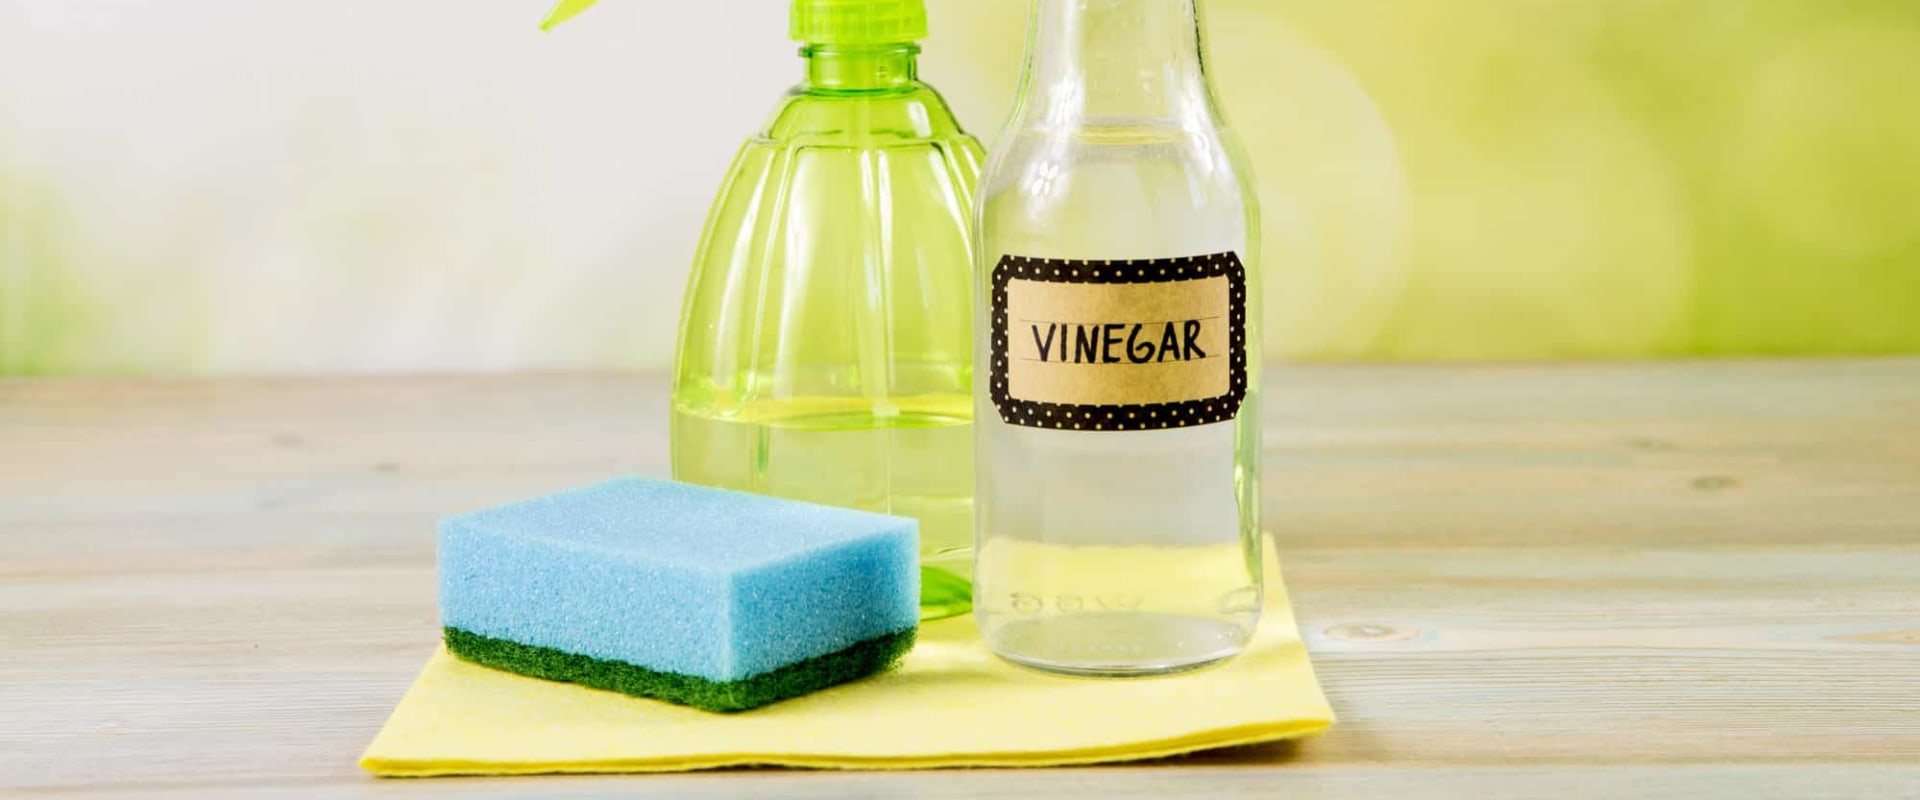 How do i choose eco friendly cleaning products?